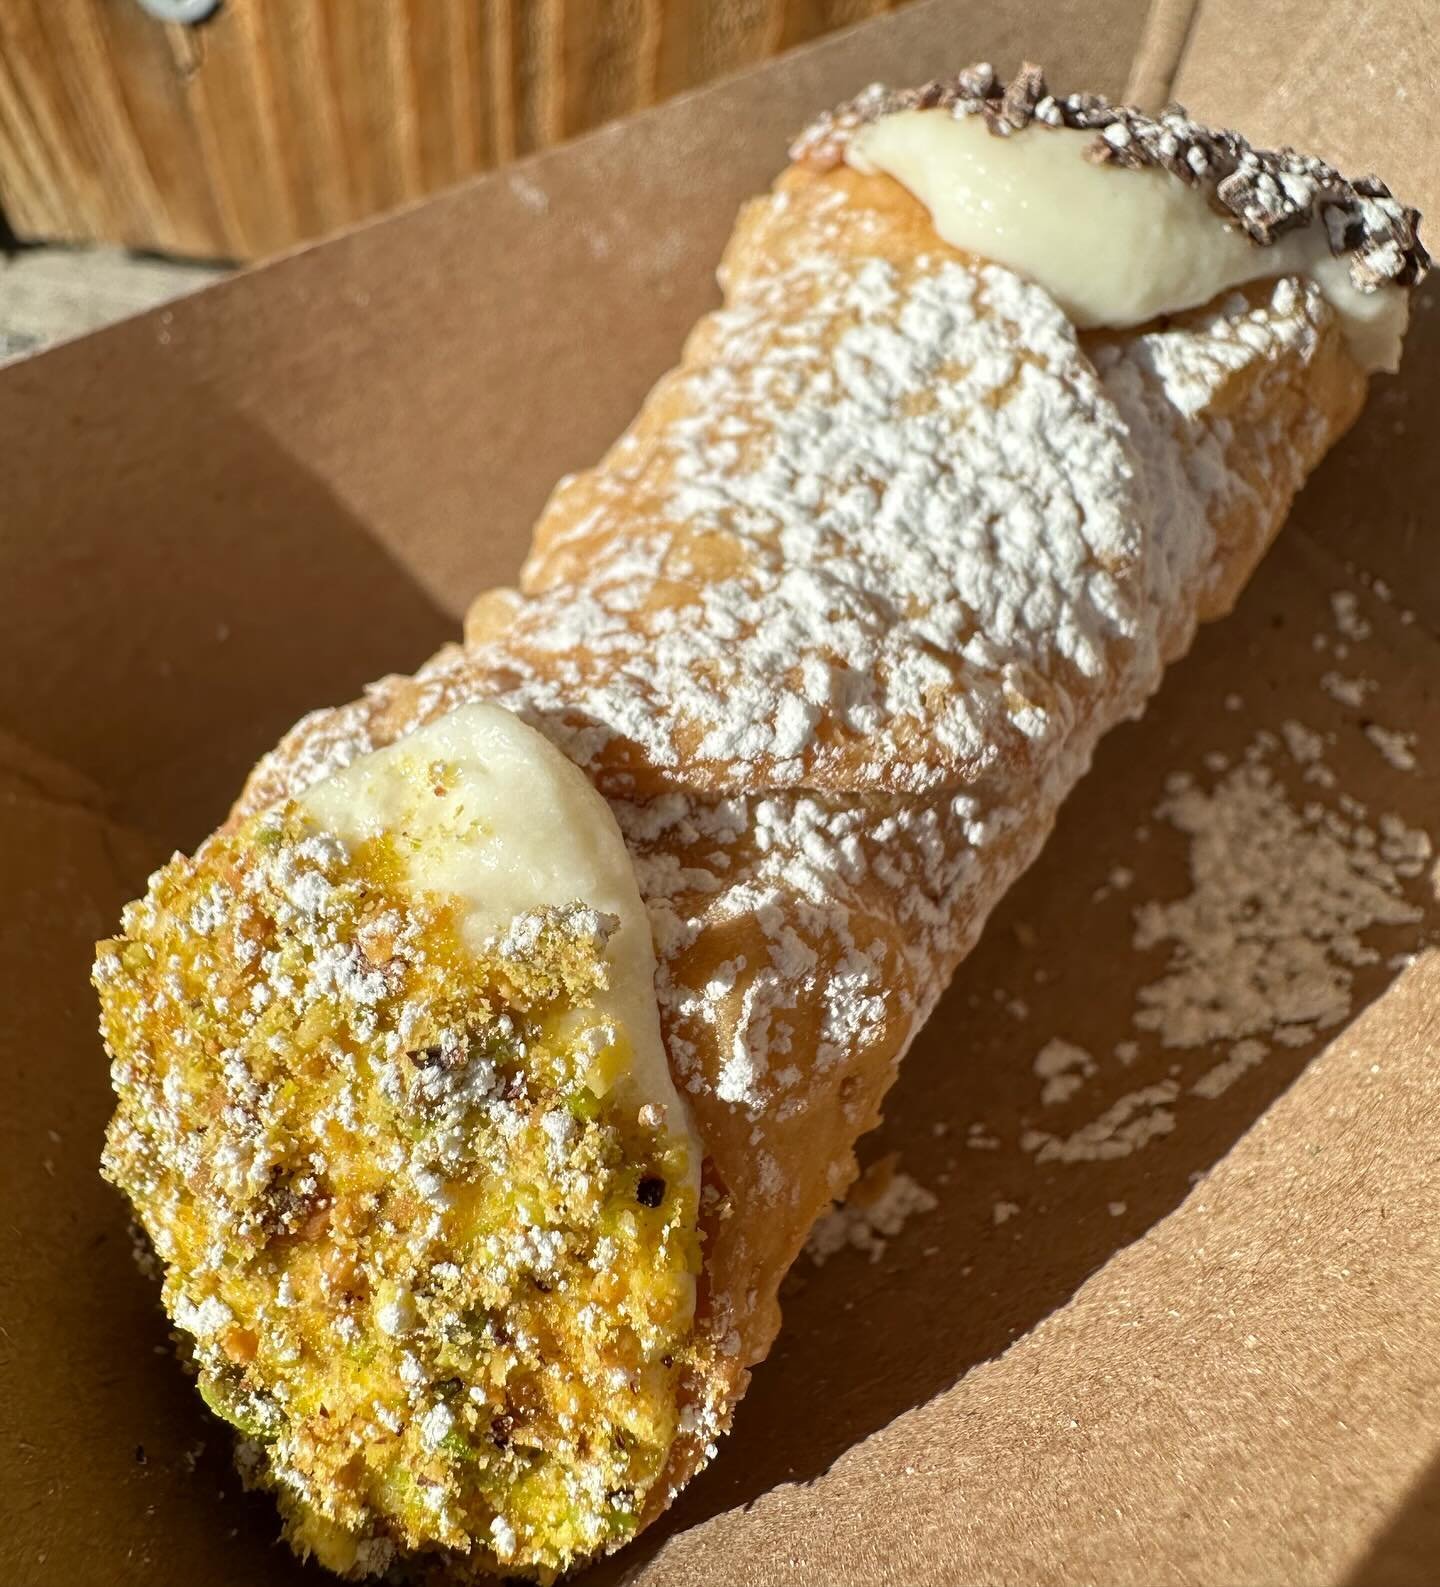 Pistachio and Chocolate Cannoli has us all drooling including Percy🤤